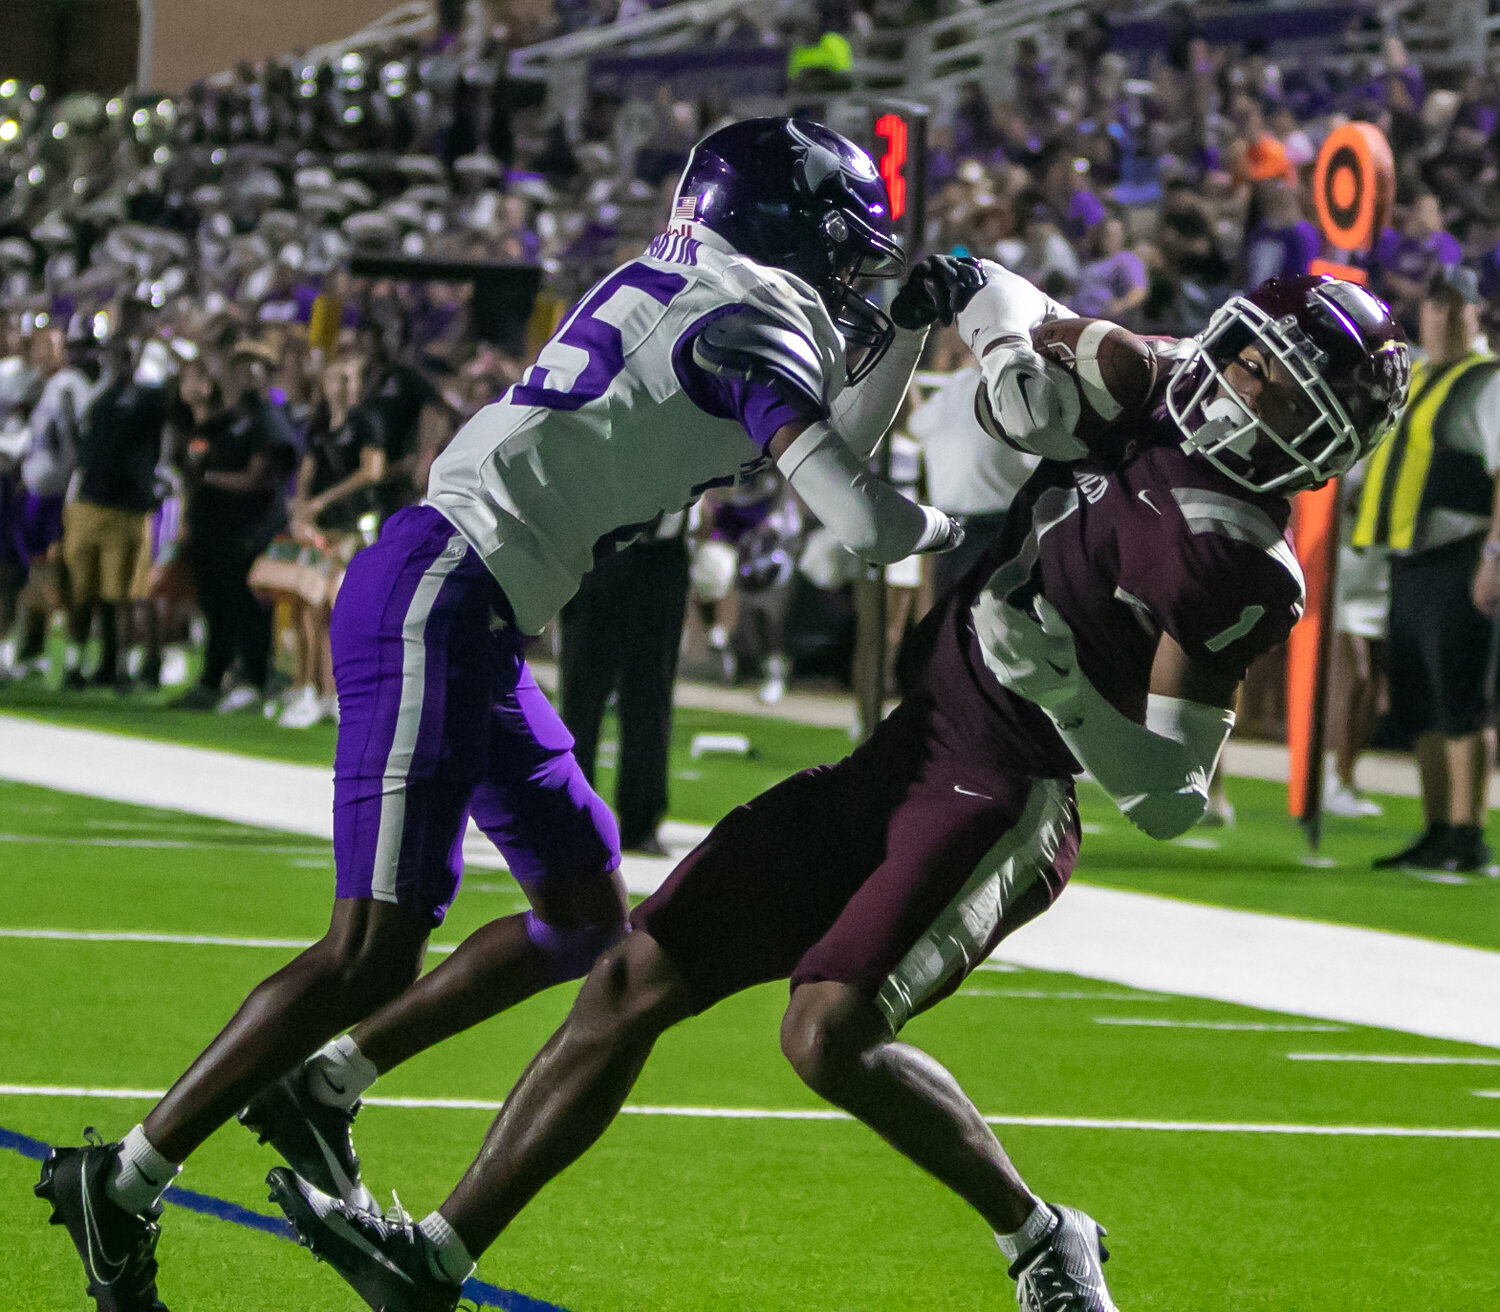 Taytum Johnson comes down with a touchdown catch during Friday's District 19-6A game between Cinco Ranch and Morton Ranch on Friday at Rhodes Stadium.